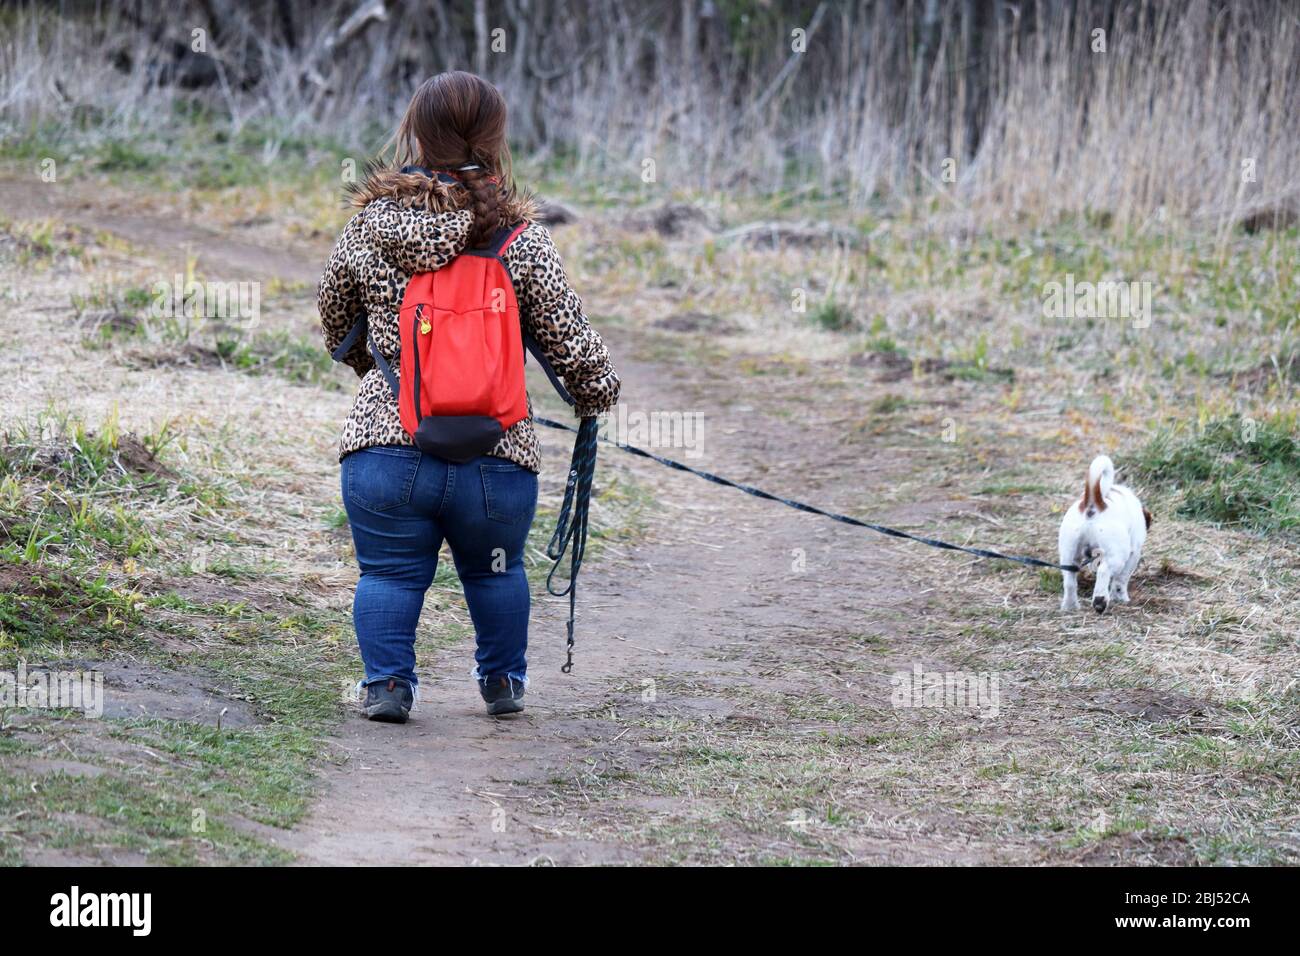 Midget woman in jeans walking a dog in a spring park, rear view Stock Photo